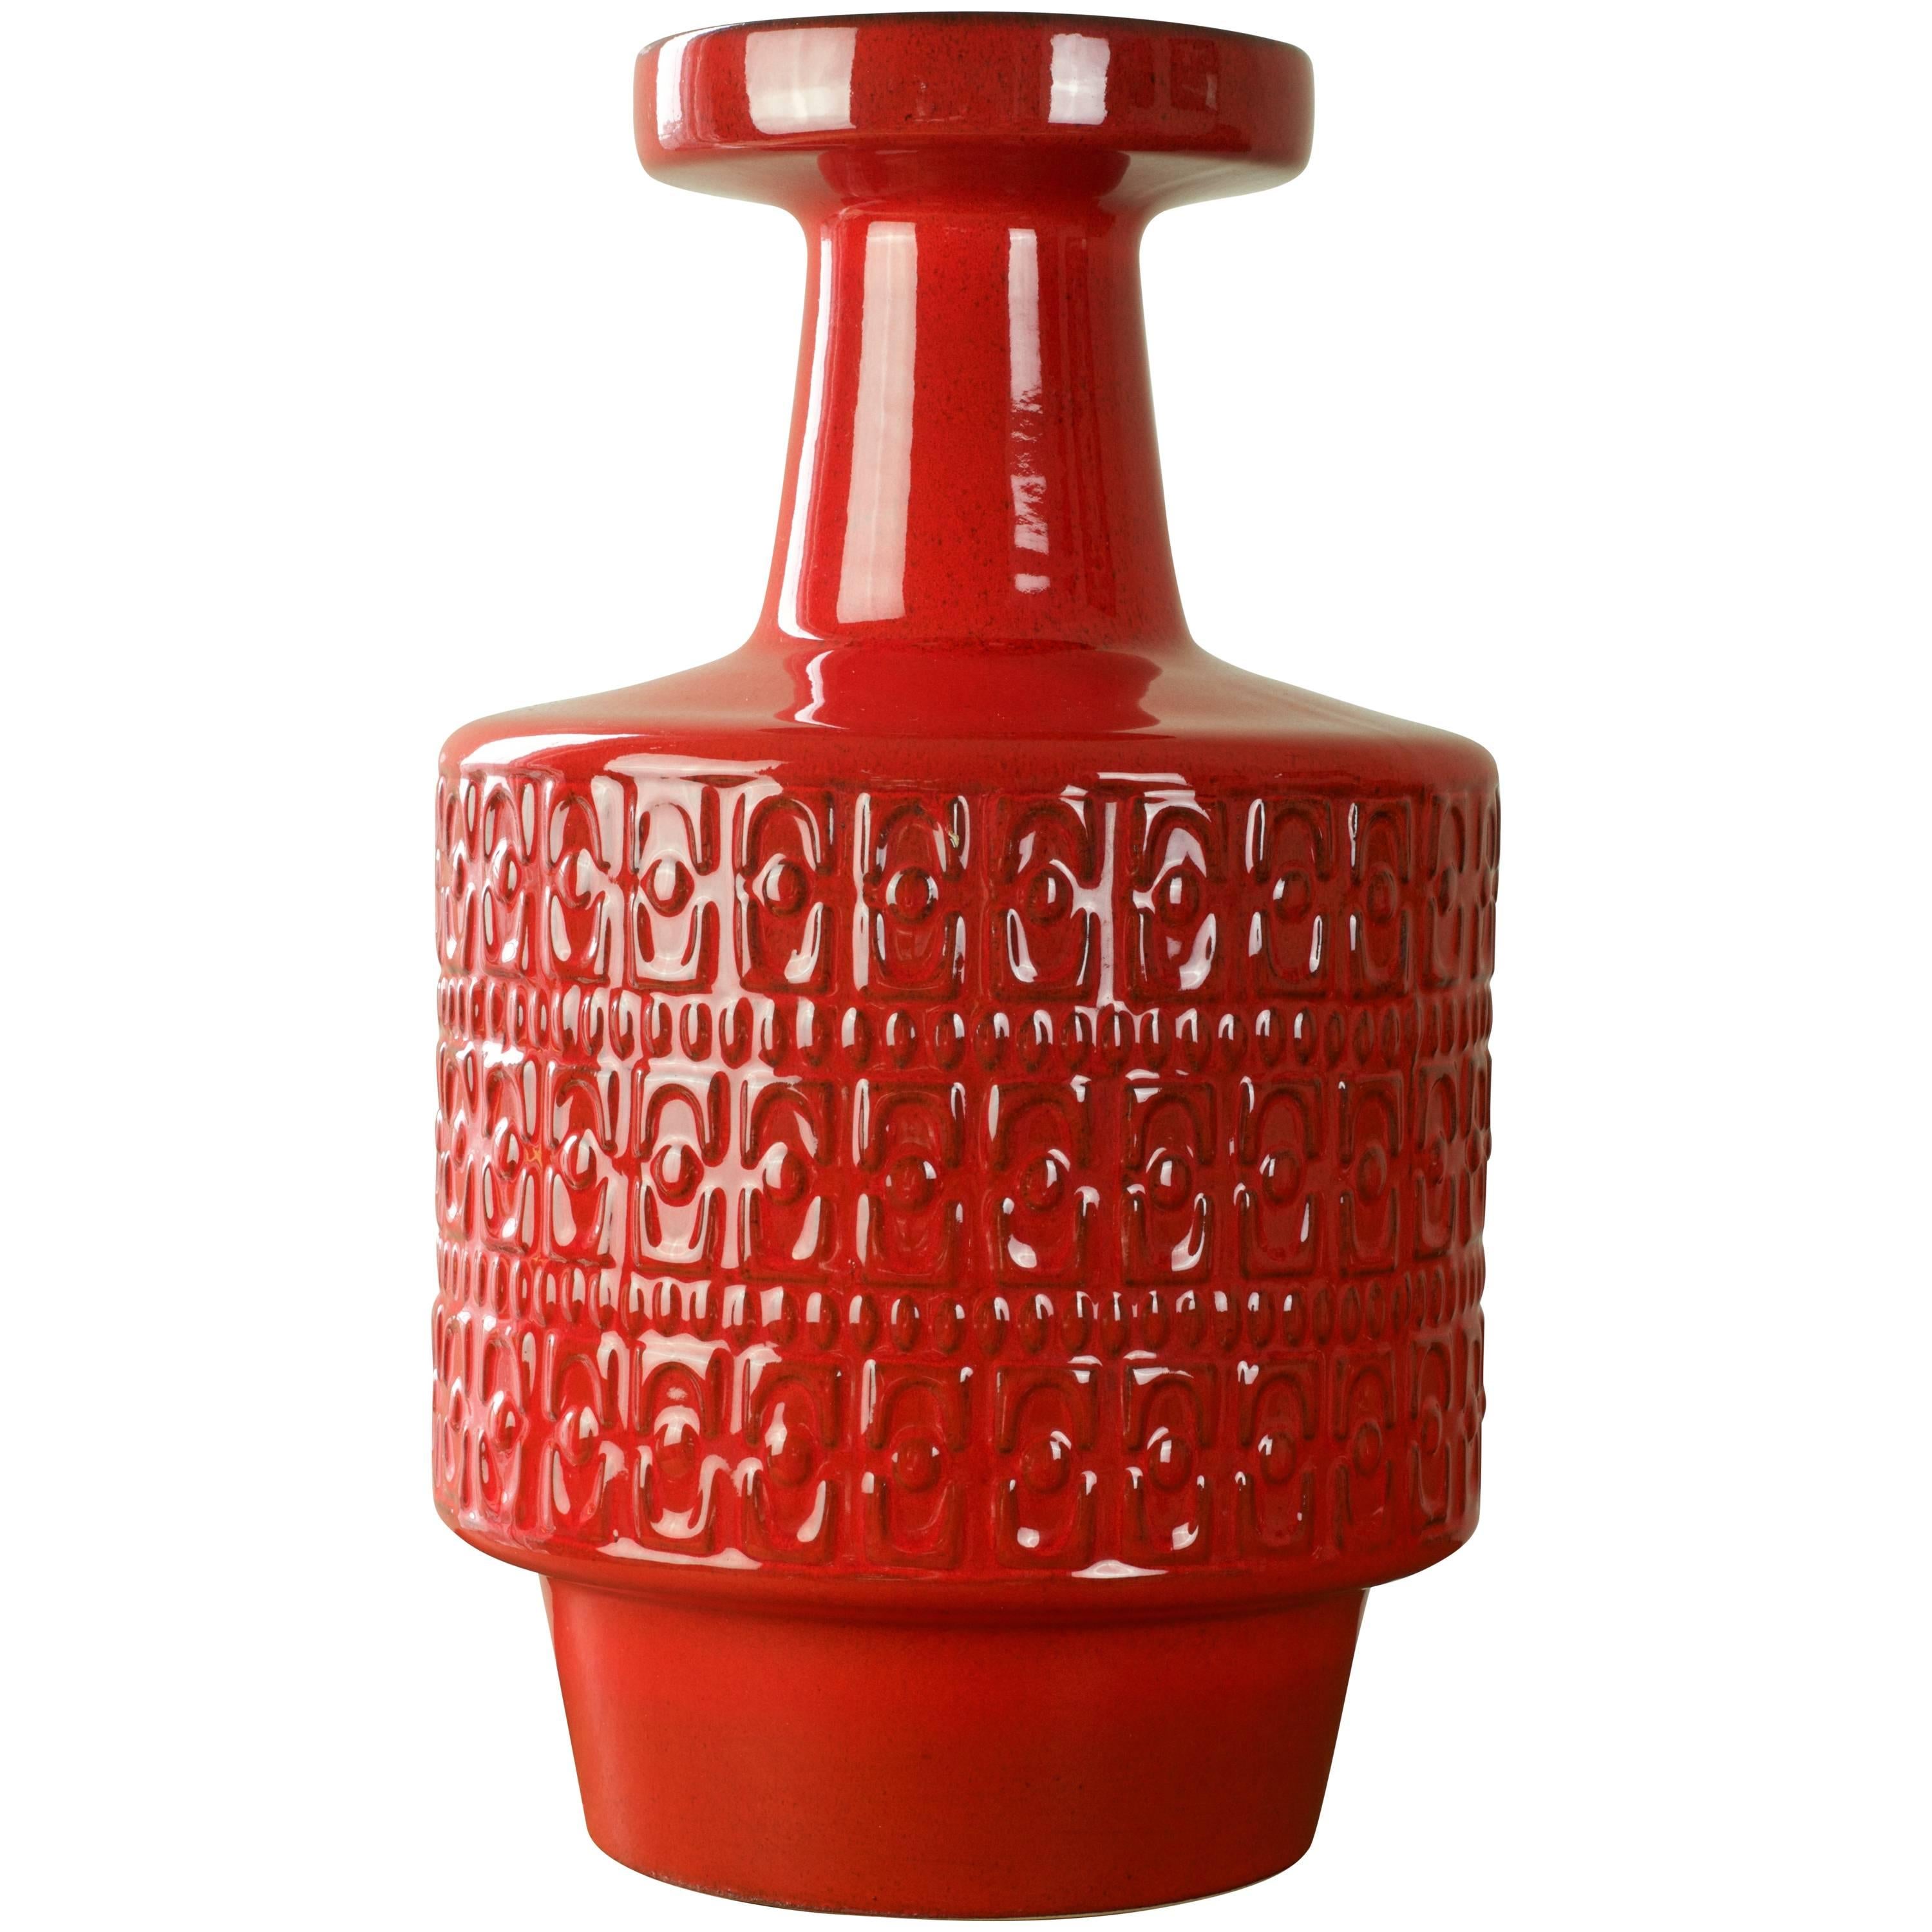 Large Modernist Bright Red West German Floor Vase by Fohr Pottery, circa 1970